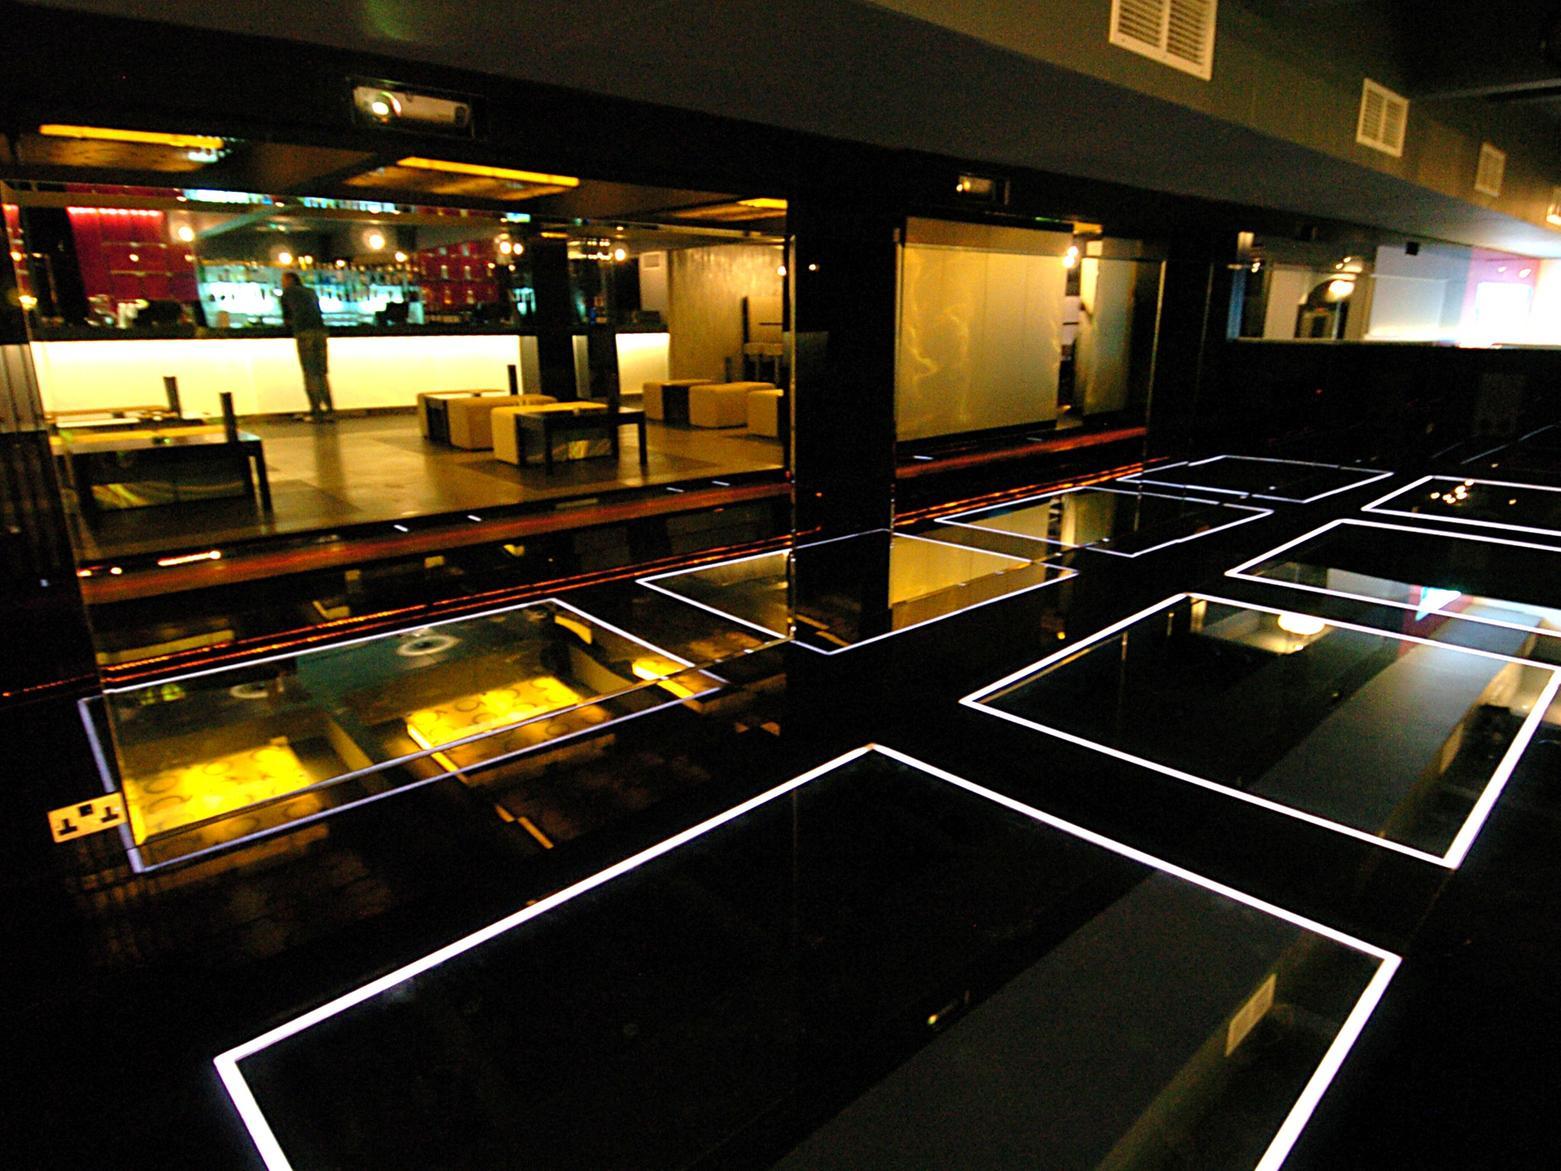 Do you remember busting some moves on this dancefloor?